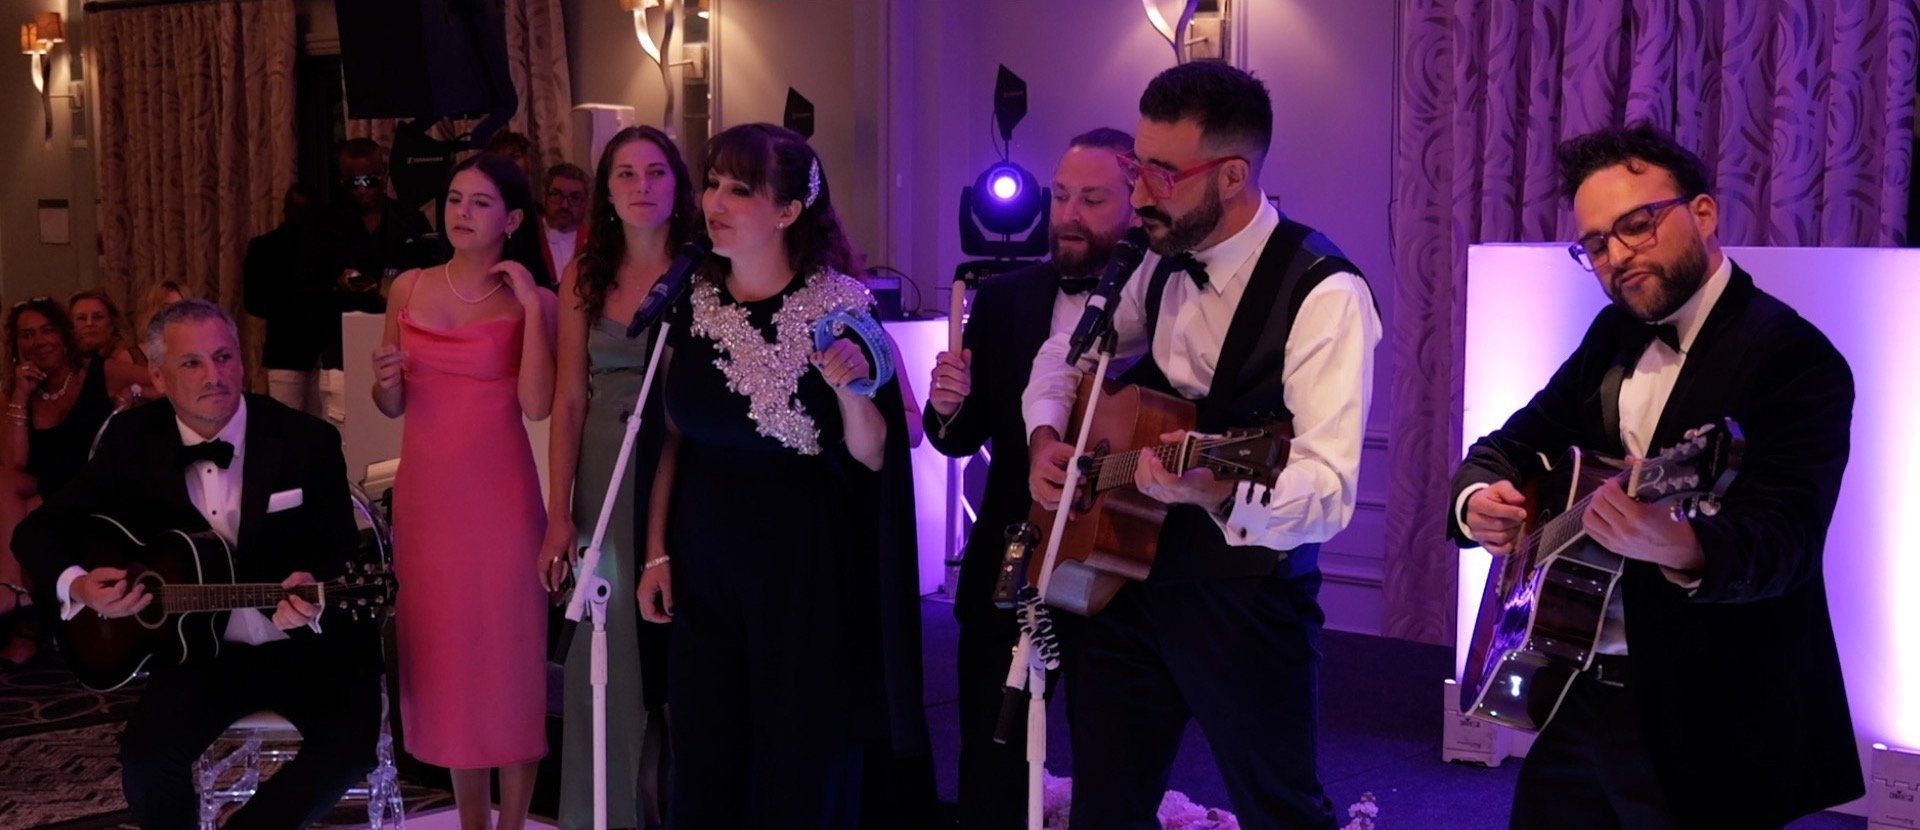 Sopwell House wedding videography - 3 Cheers Media - family band.jpg